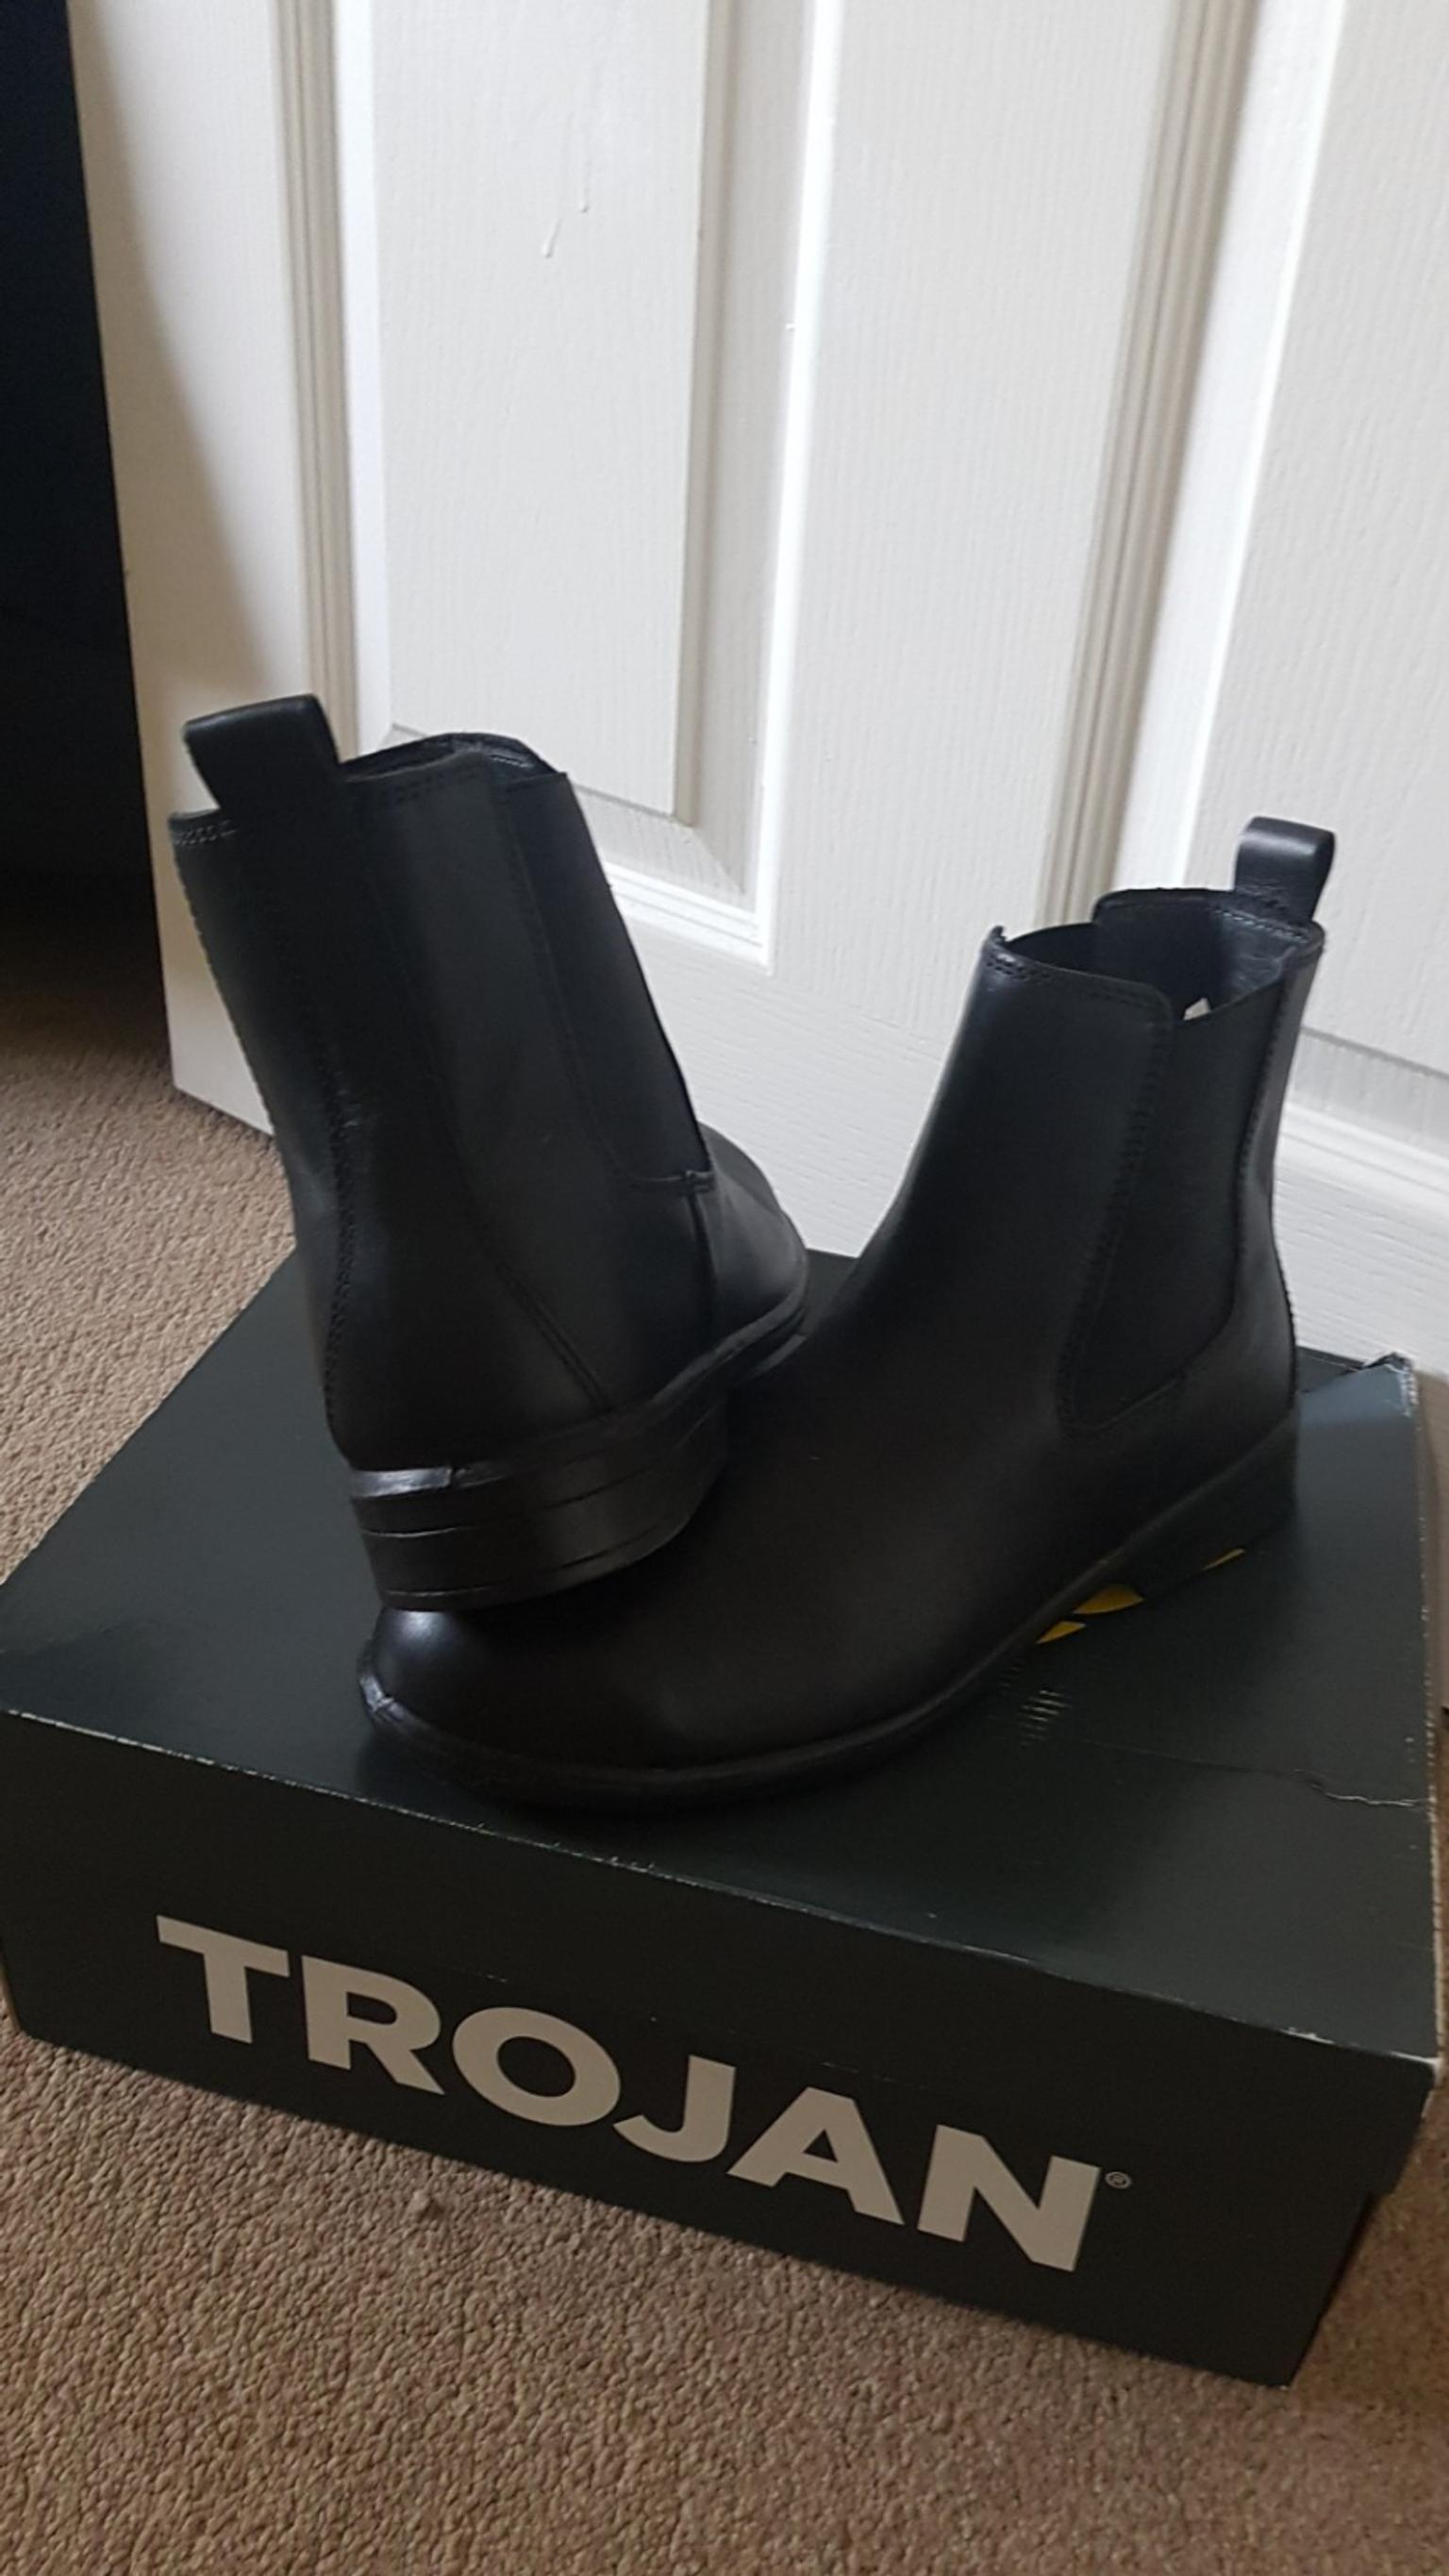 womens safety chelsea boots